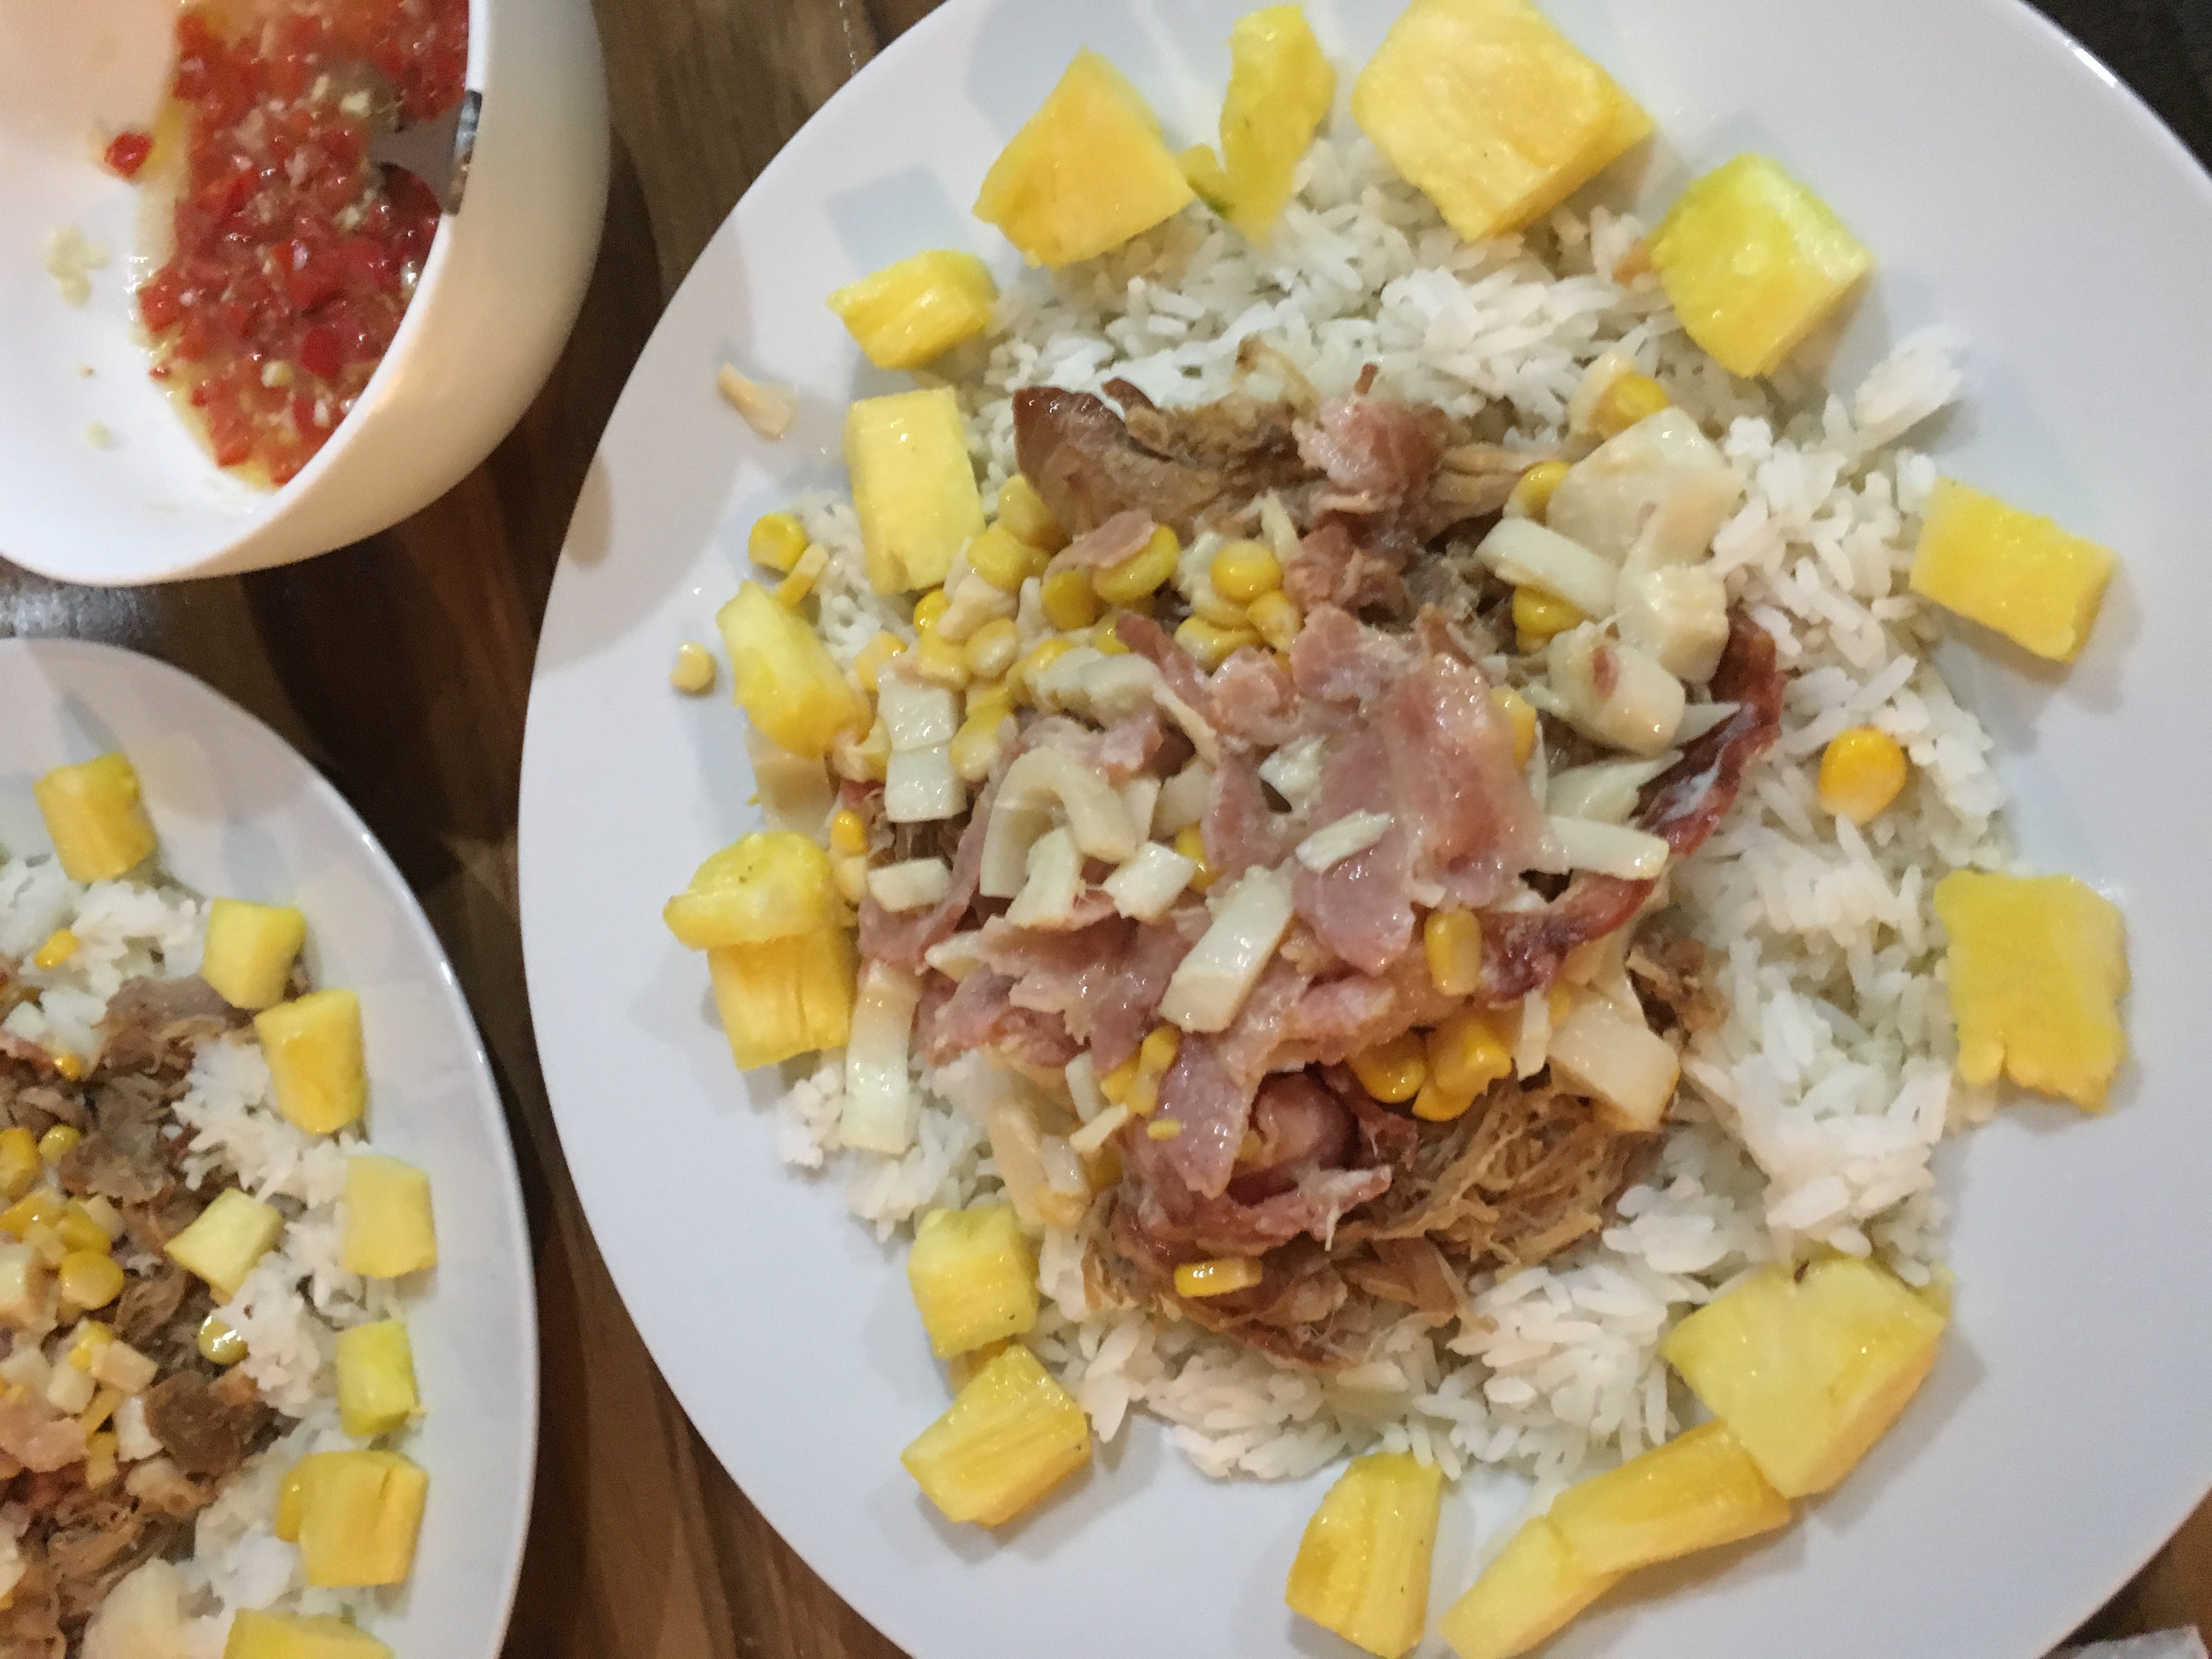 Several kinds of slow-cooked pork with pineapple and heart of palm